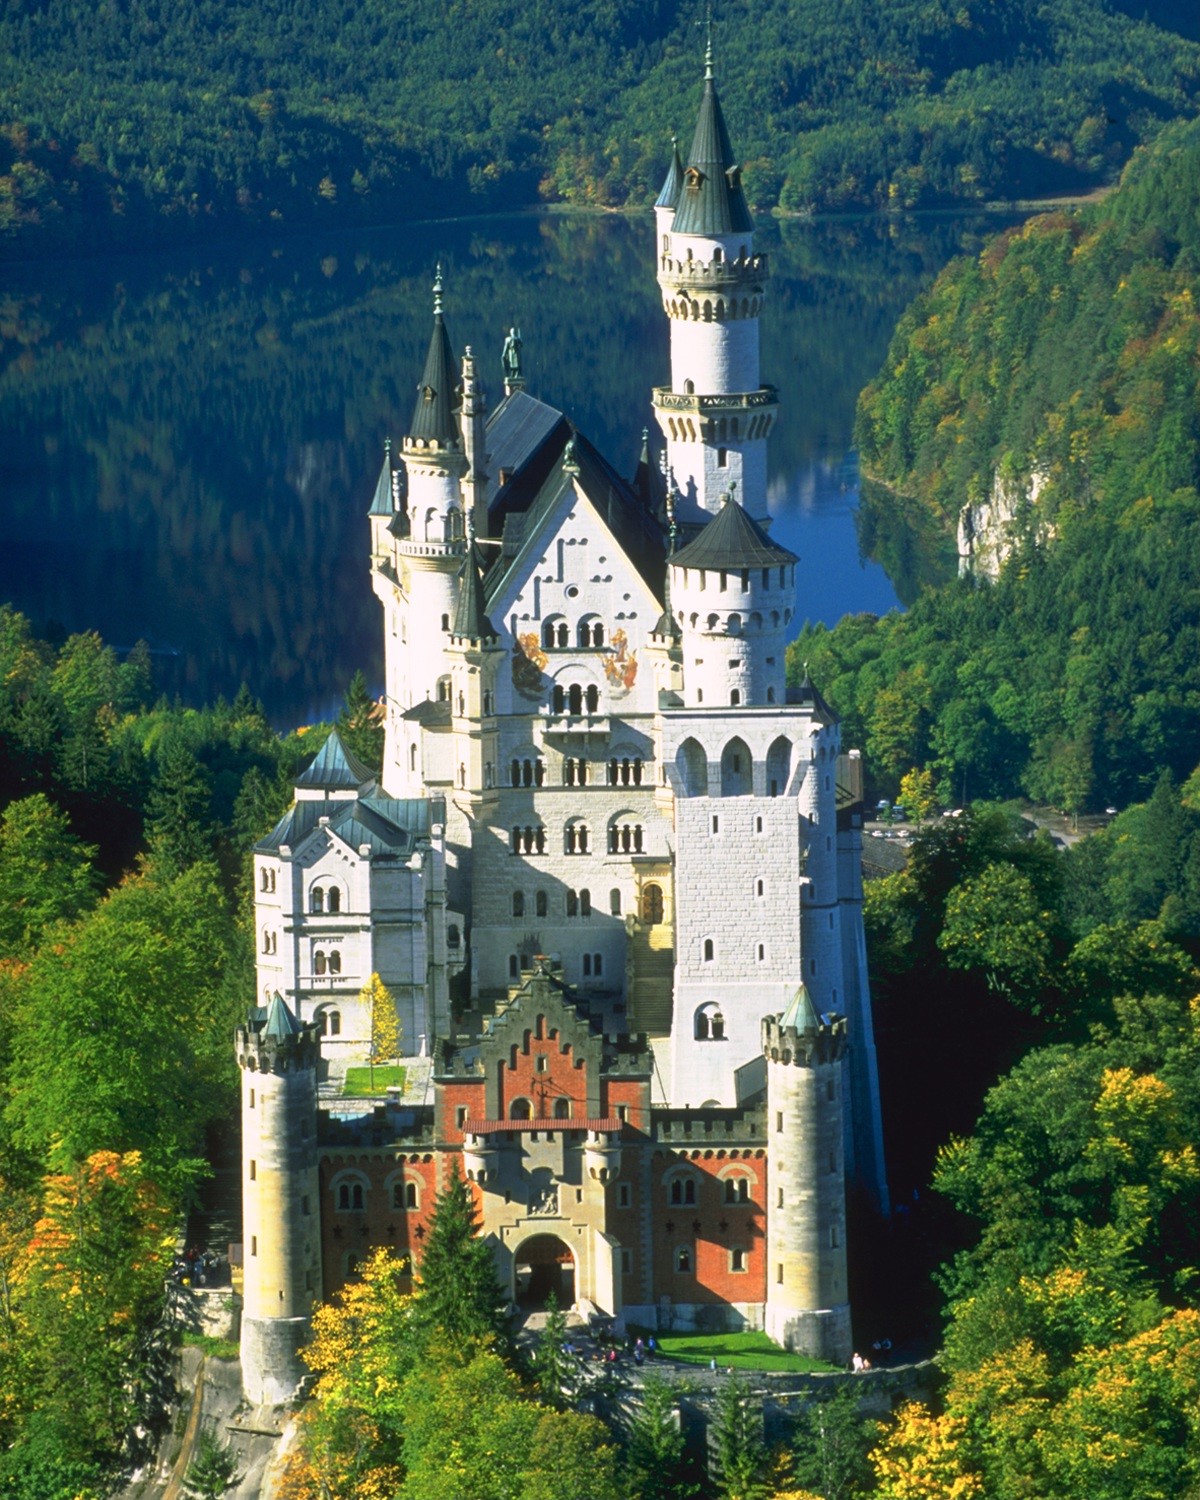 Collection 95+ Images pictures of neuschwanstein castle germany Full HD, 2k, 4k